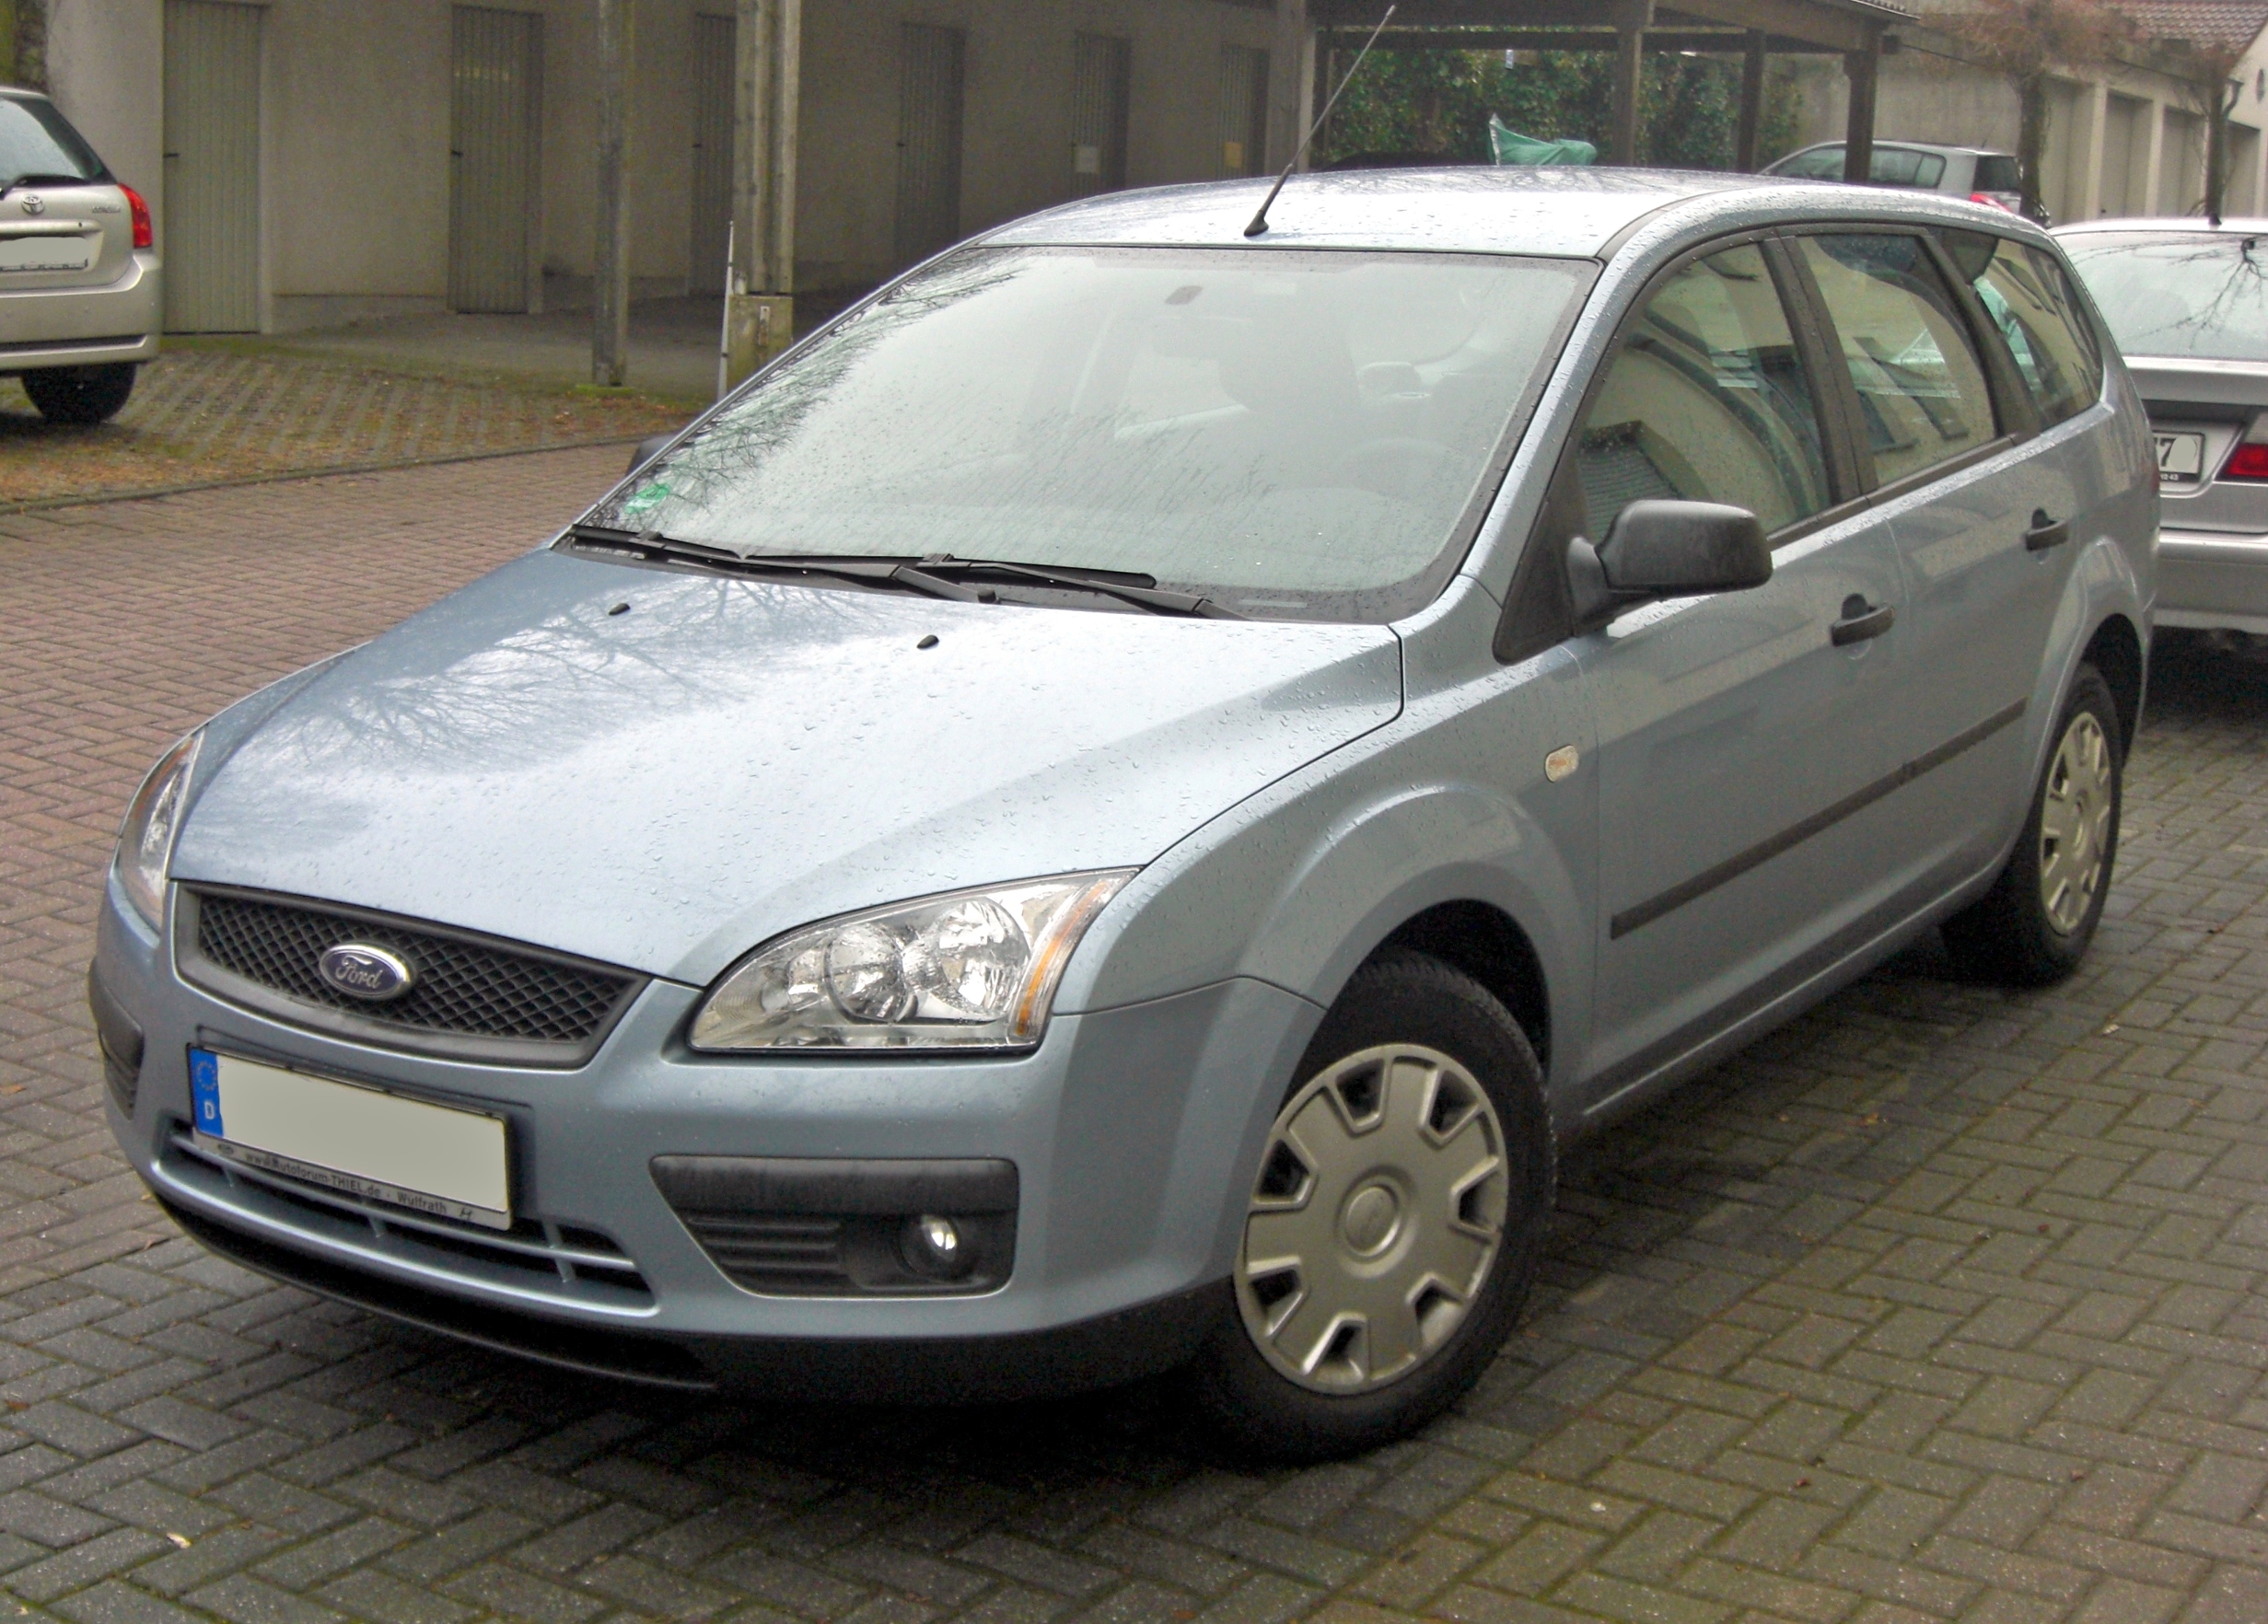 File:Ford Focus MK2 Turnier front 20081206.jpg - Wikimedia Commons